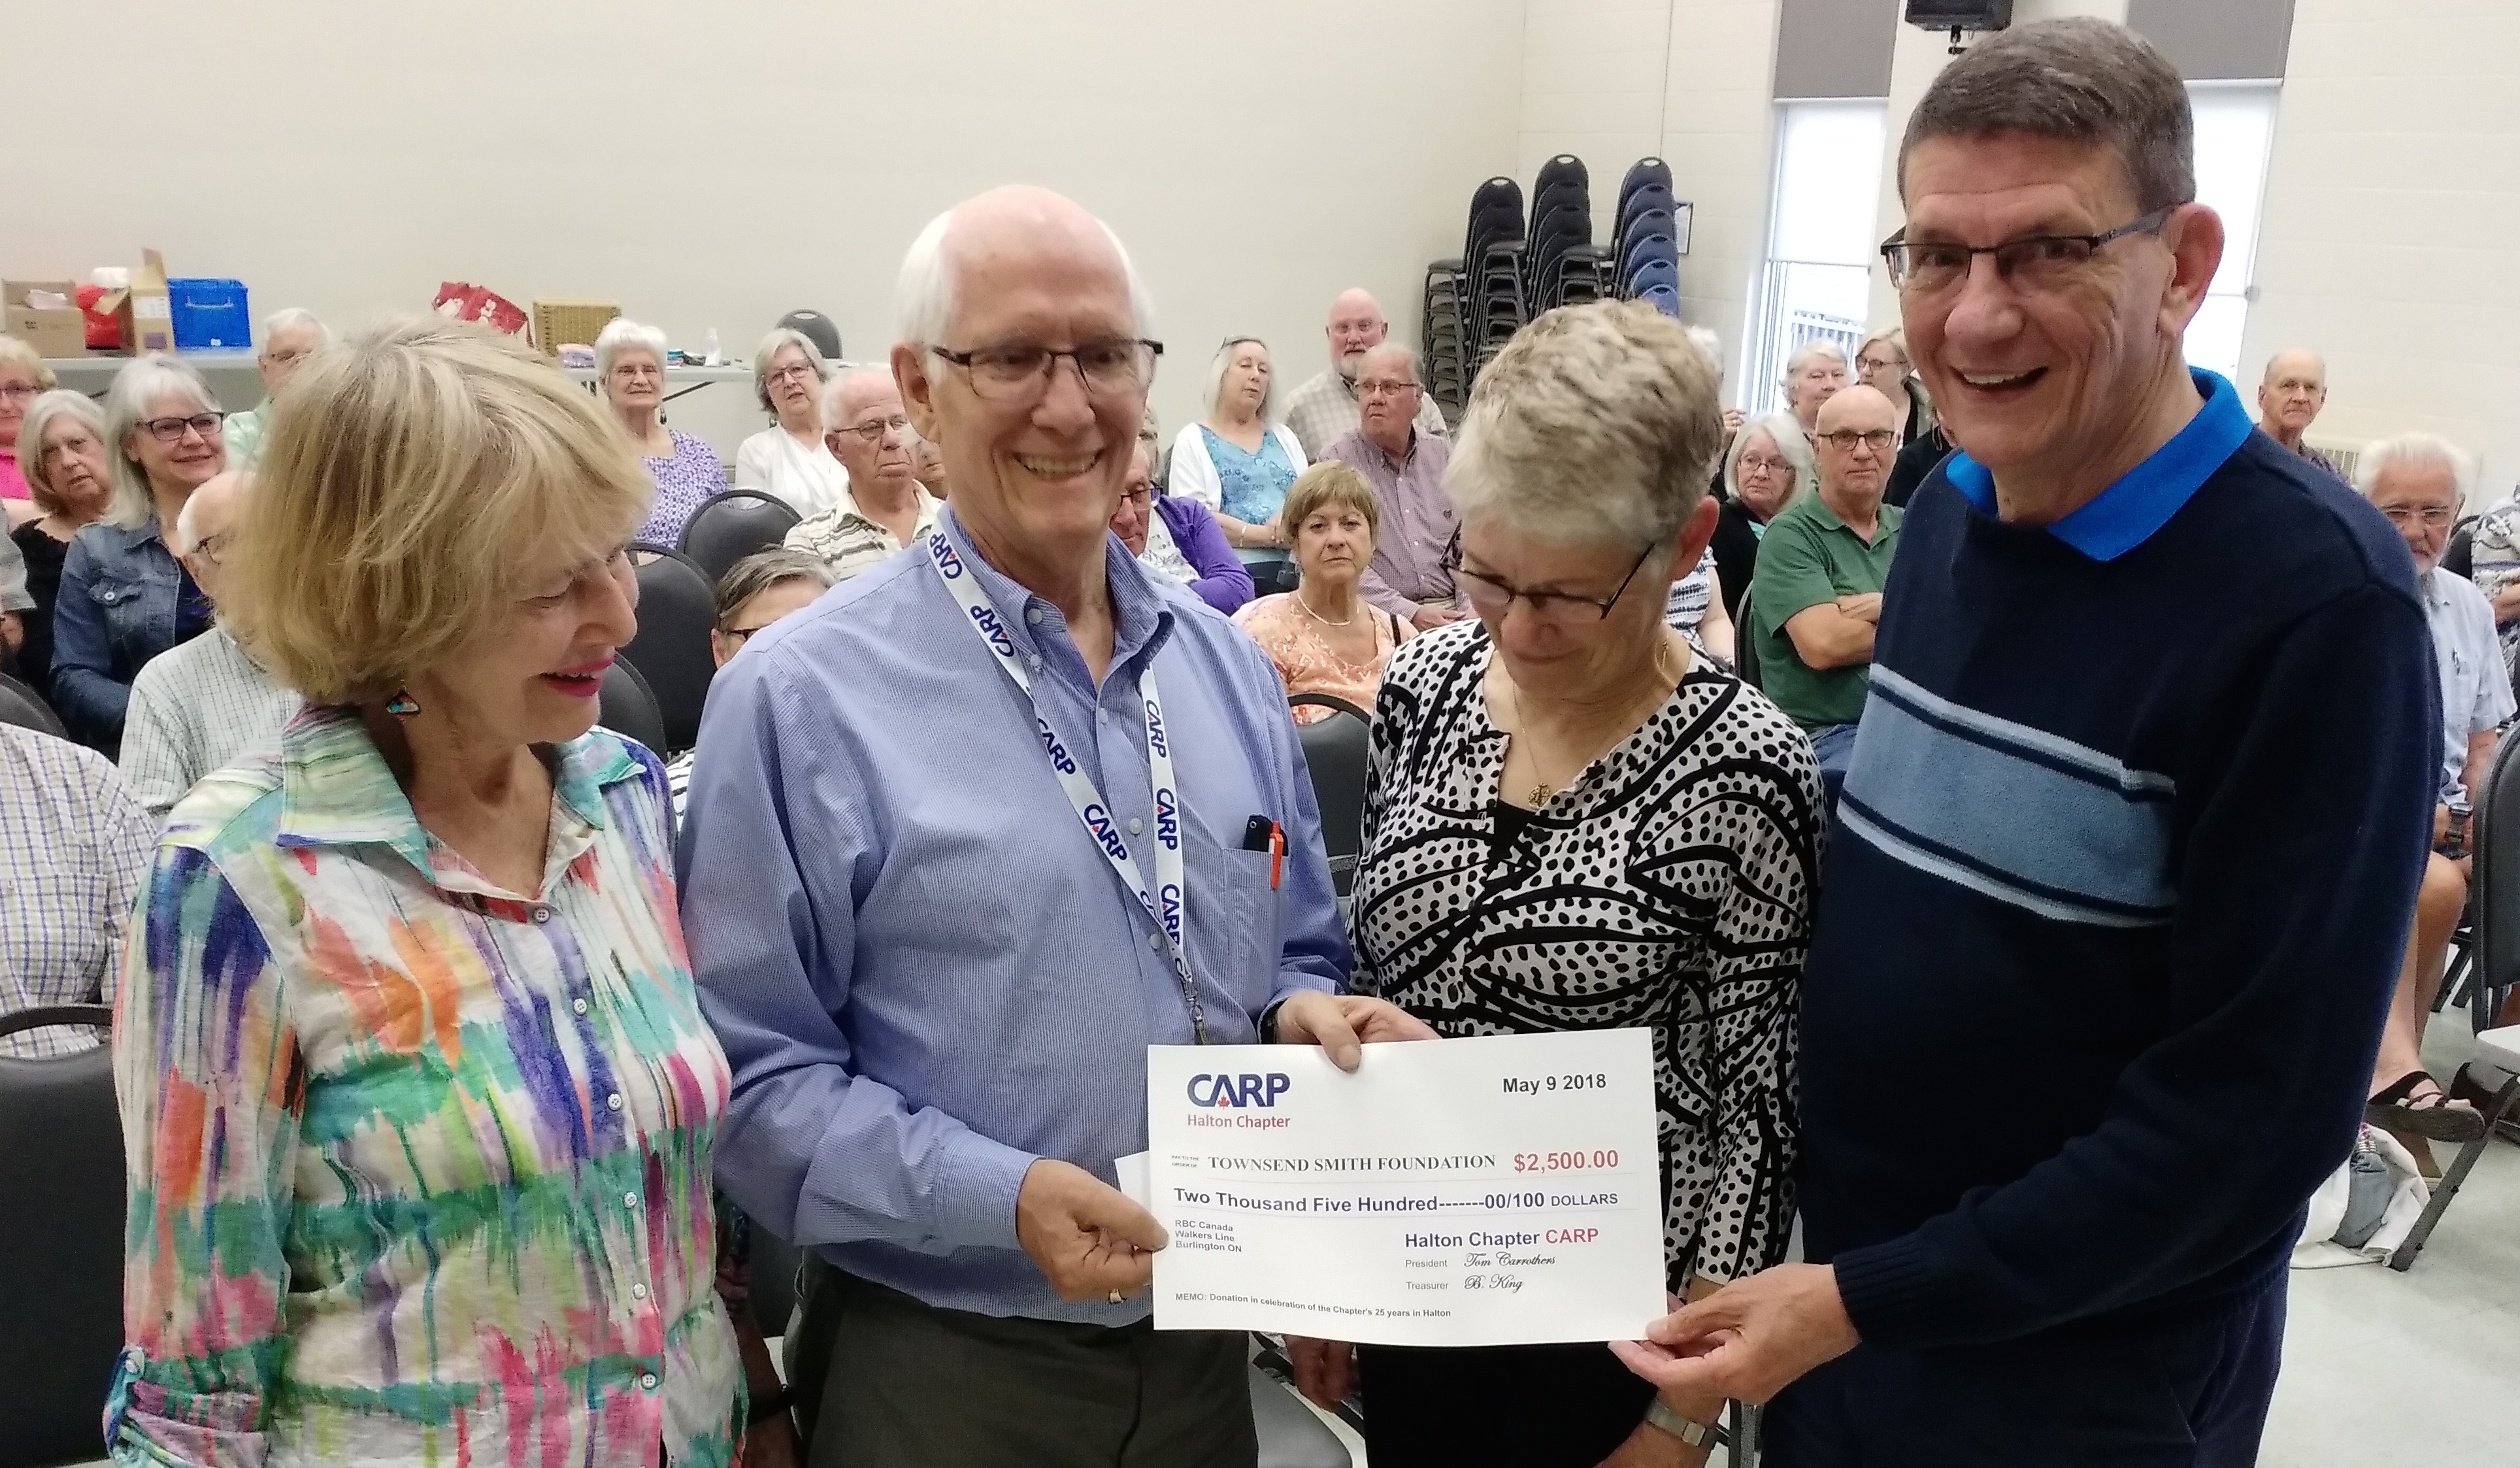 CARP (Canadian Association of Retired Persons) Halton Chapter is Celebrating its 25th Anniversary